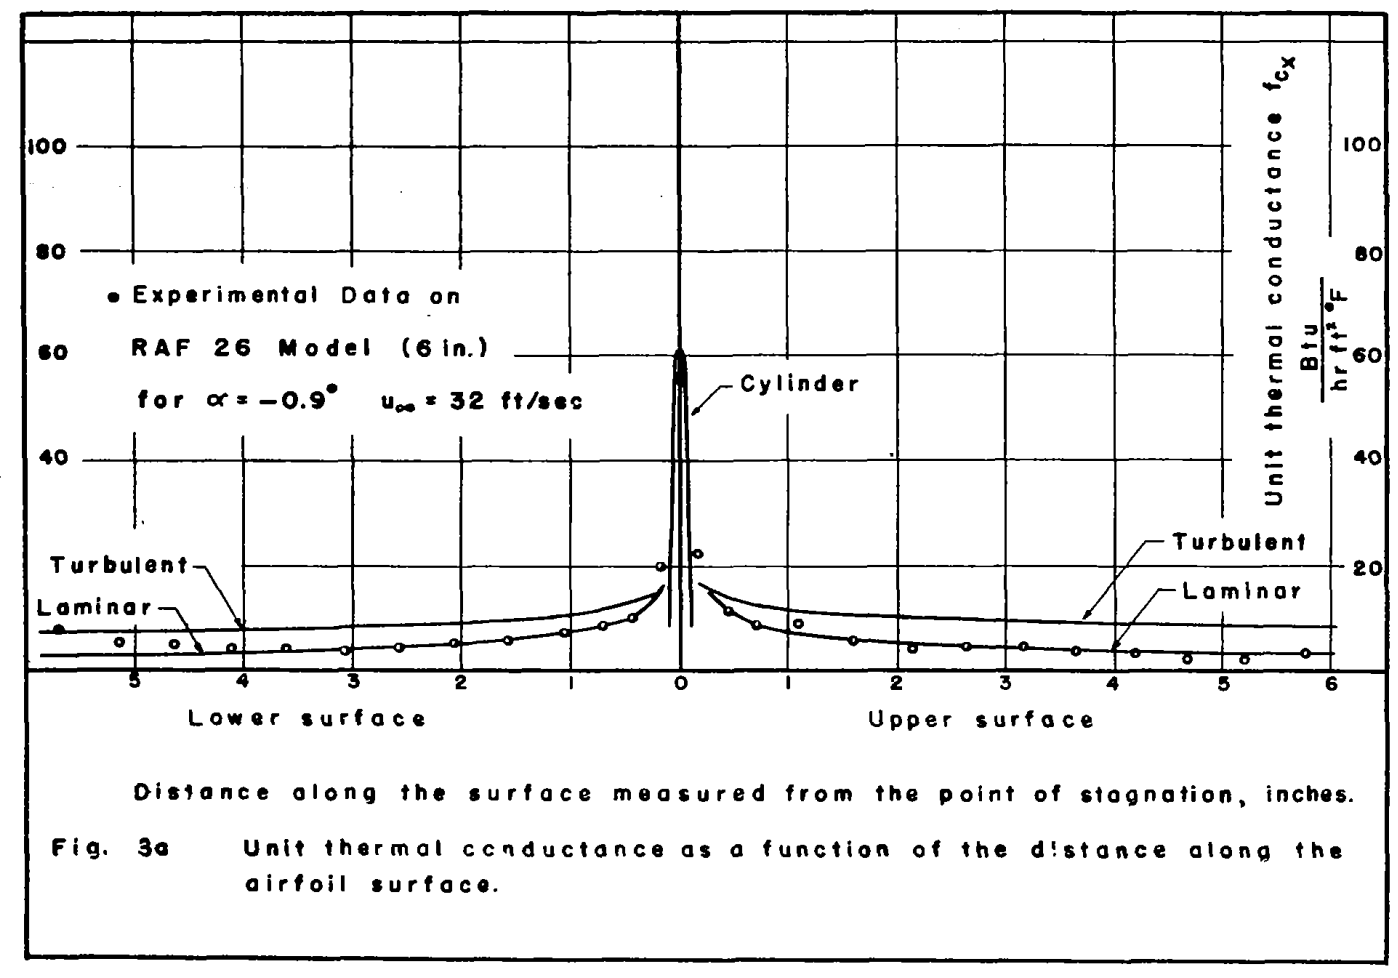 Figure 3a. Data is plotted on axes similar to Figure 2.
The measured data match the laminar curve fairly well.
The airfoil angle of attack is -0.9 degrees.